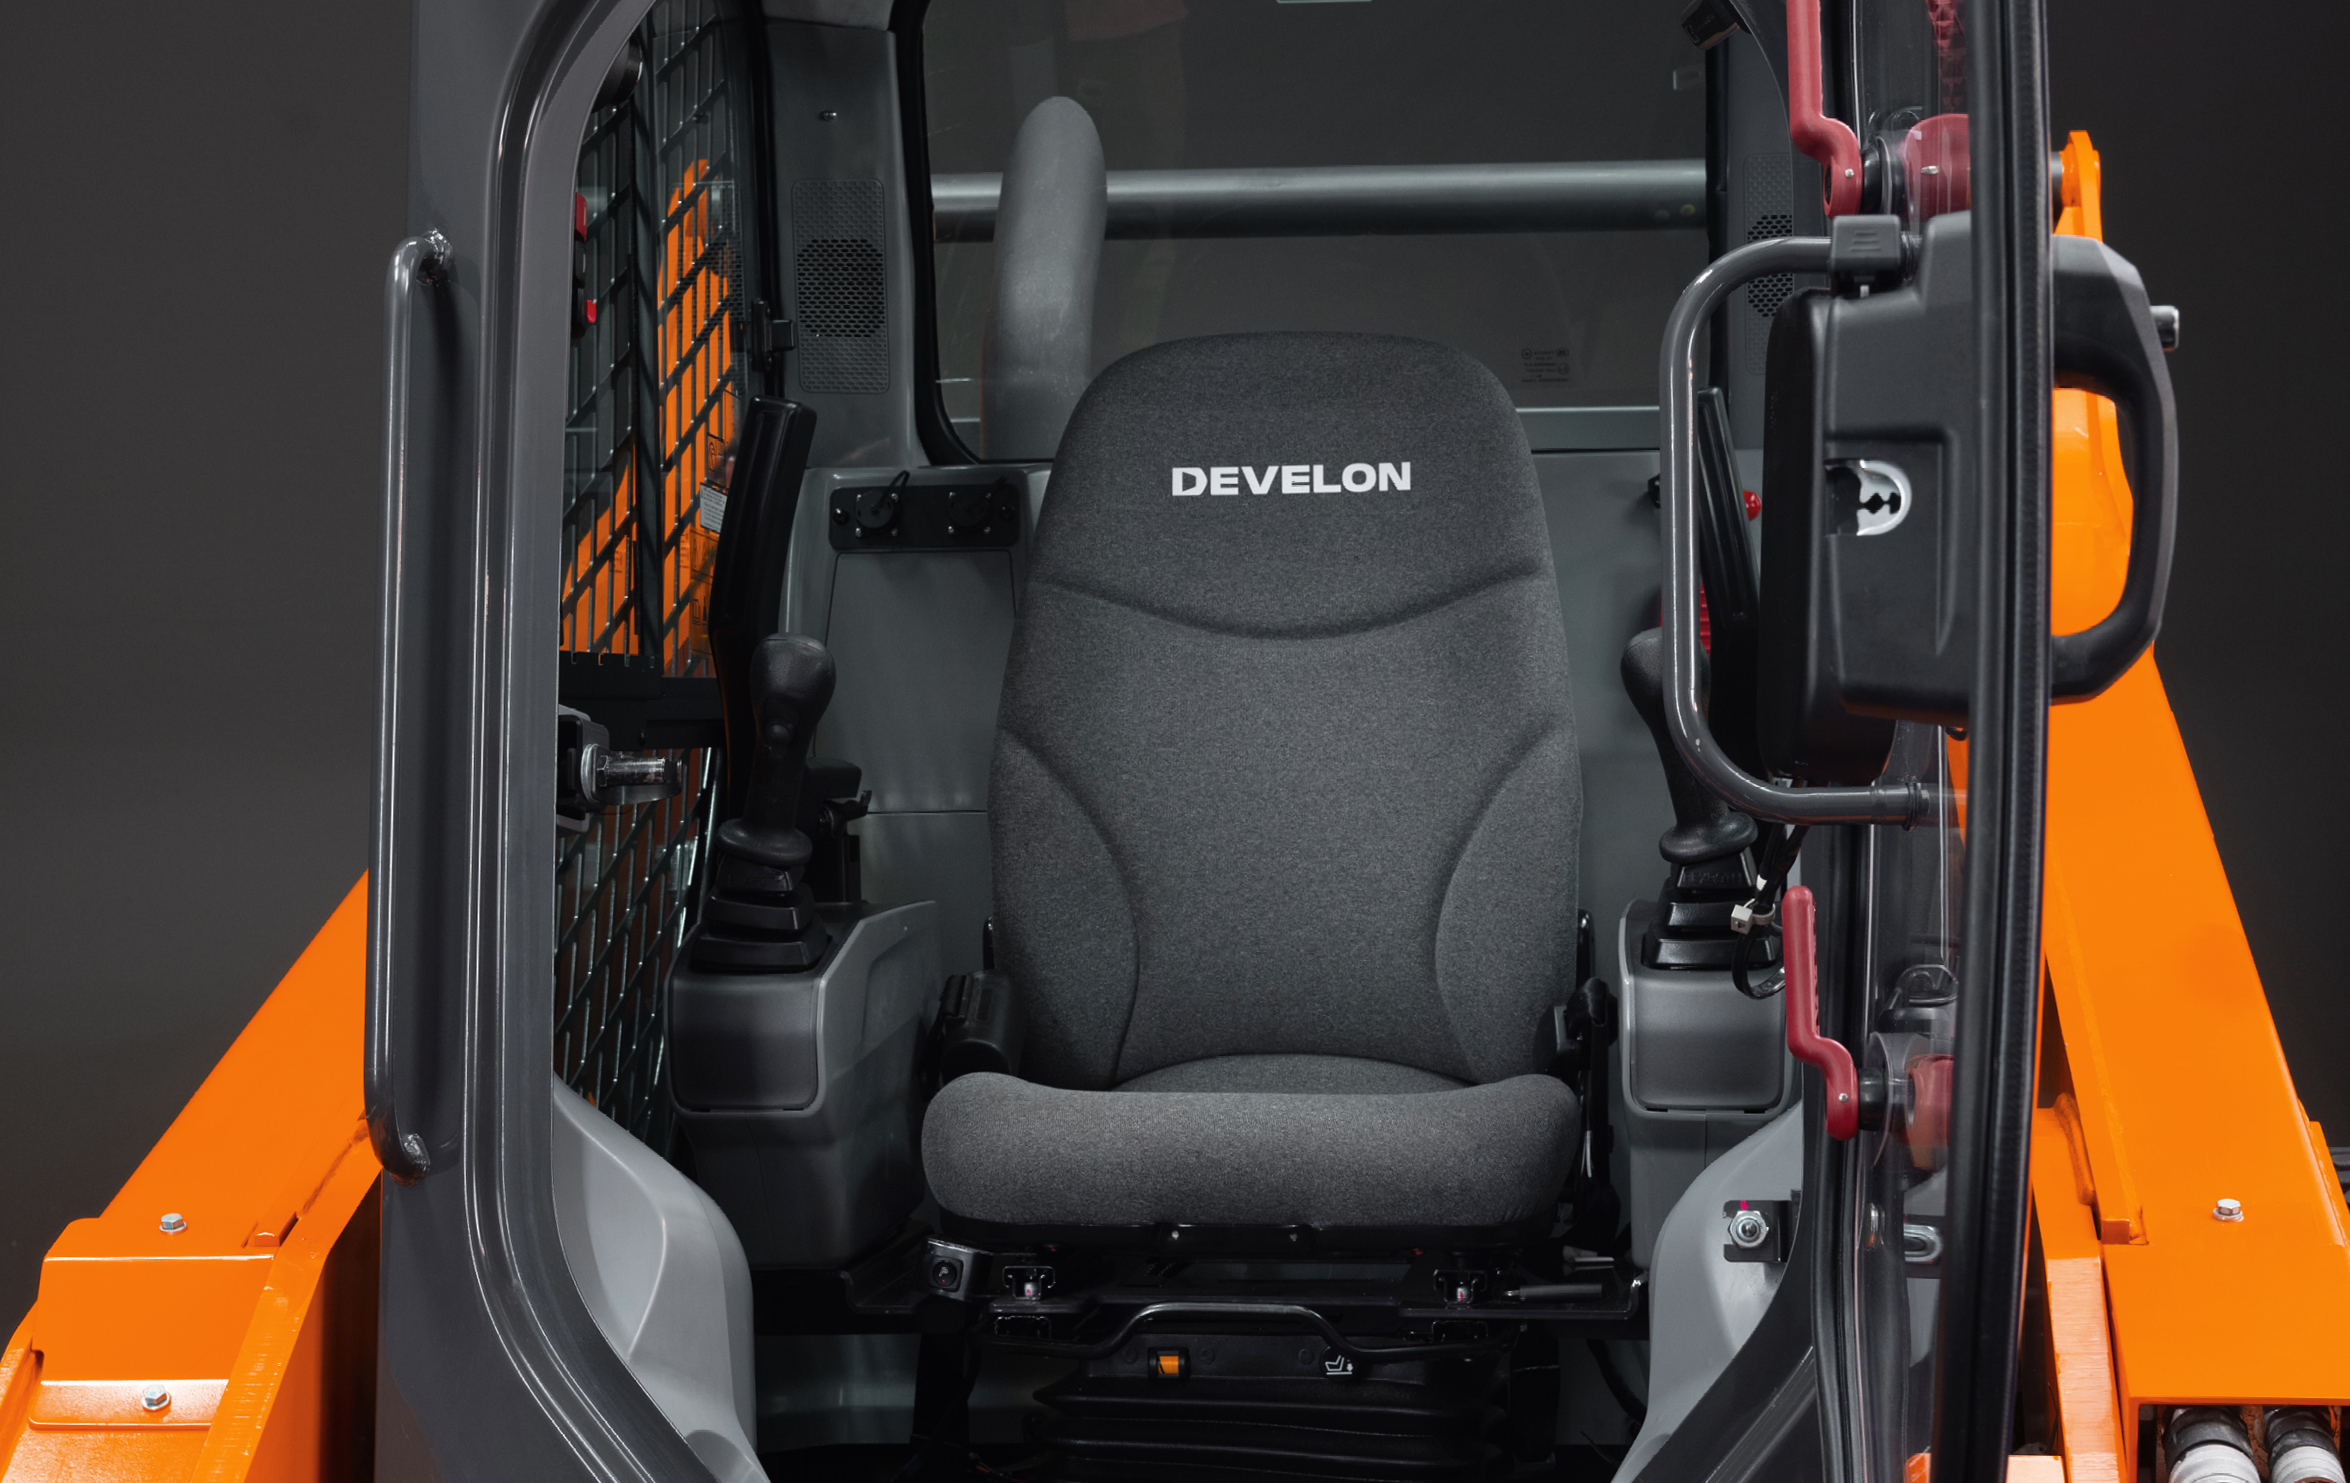 The in-cab of the DEVELON compact track loader